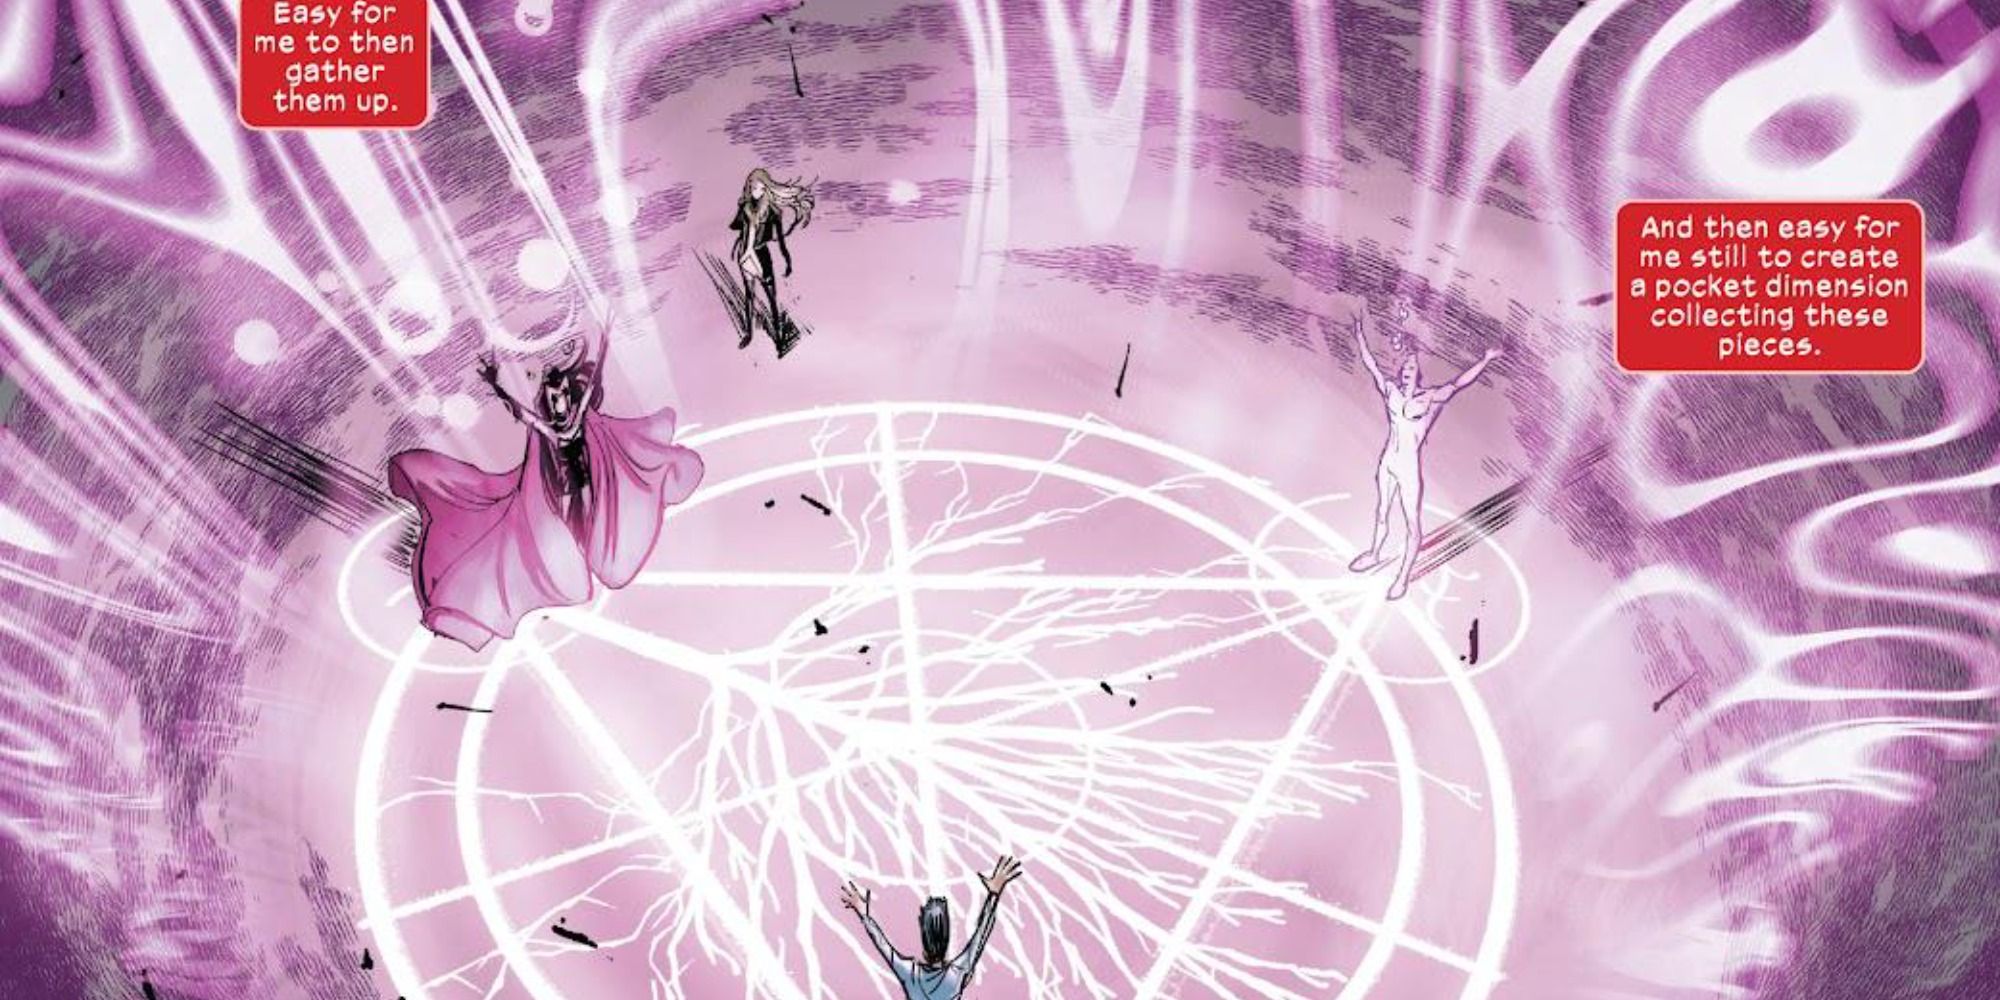 The Scarlet Witch creates a mutant afterlife in Marvel Comics.